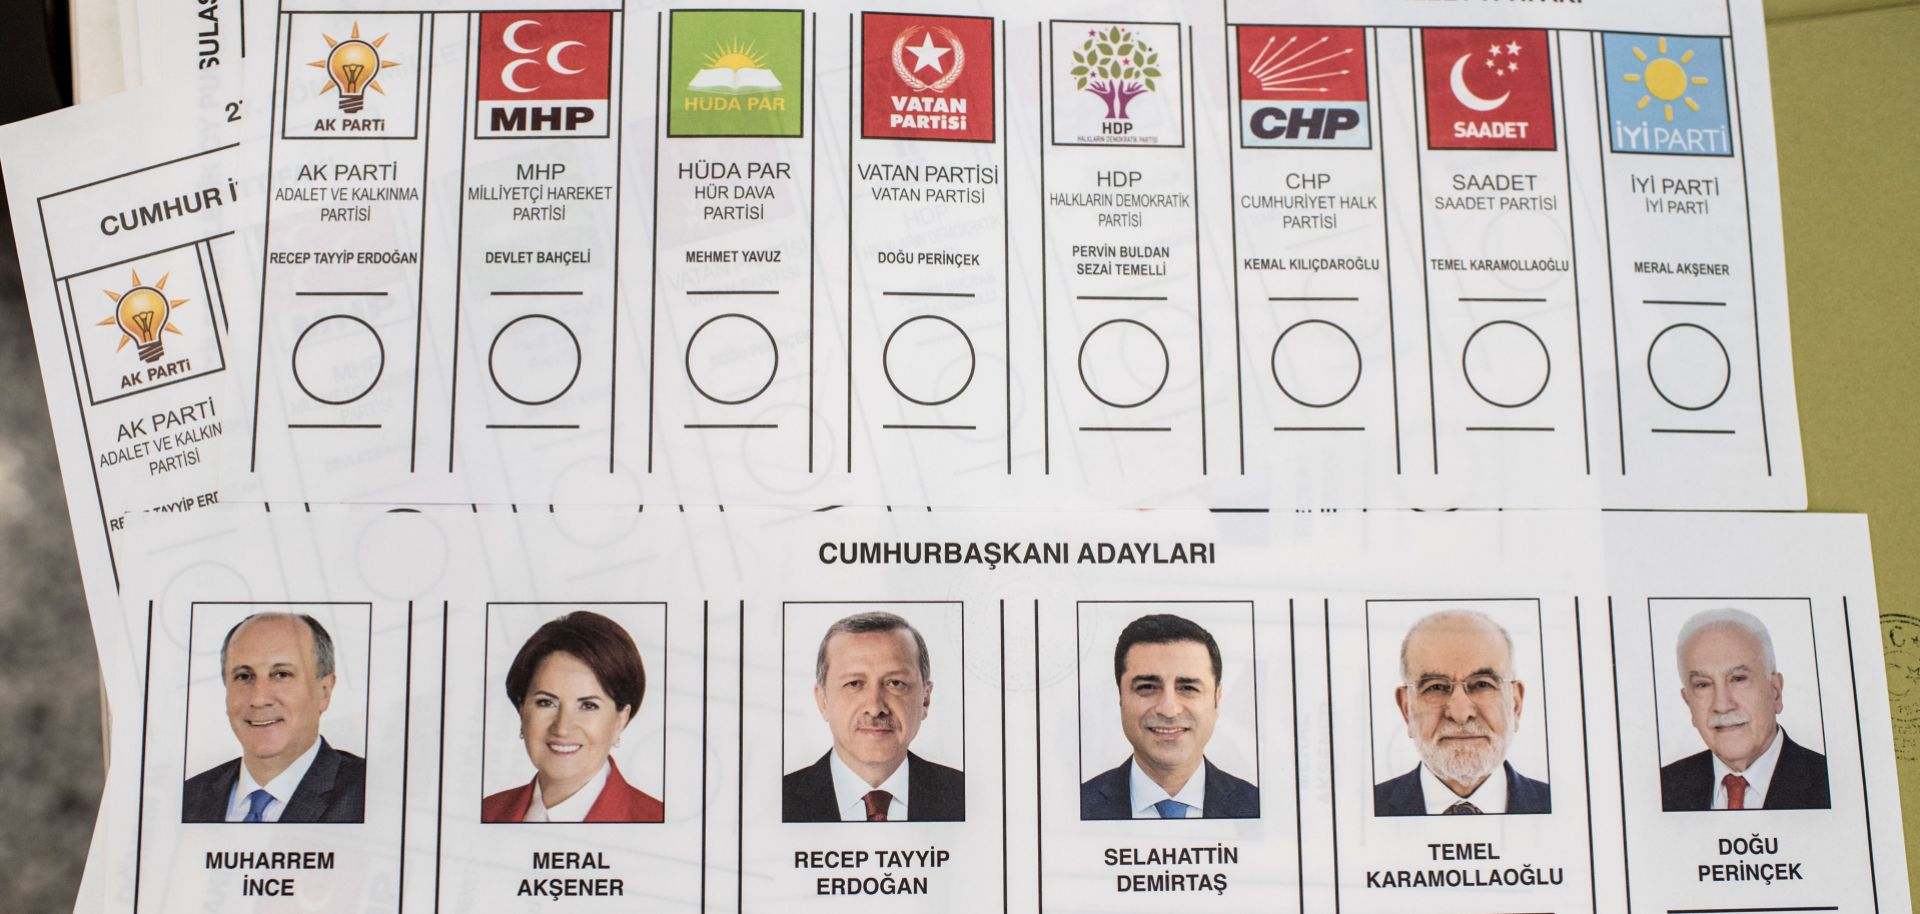 A paper ballot includes portraits of the candidates in Turkey's upcoming presidential election, scheduled for June 24.